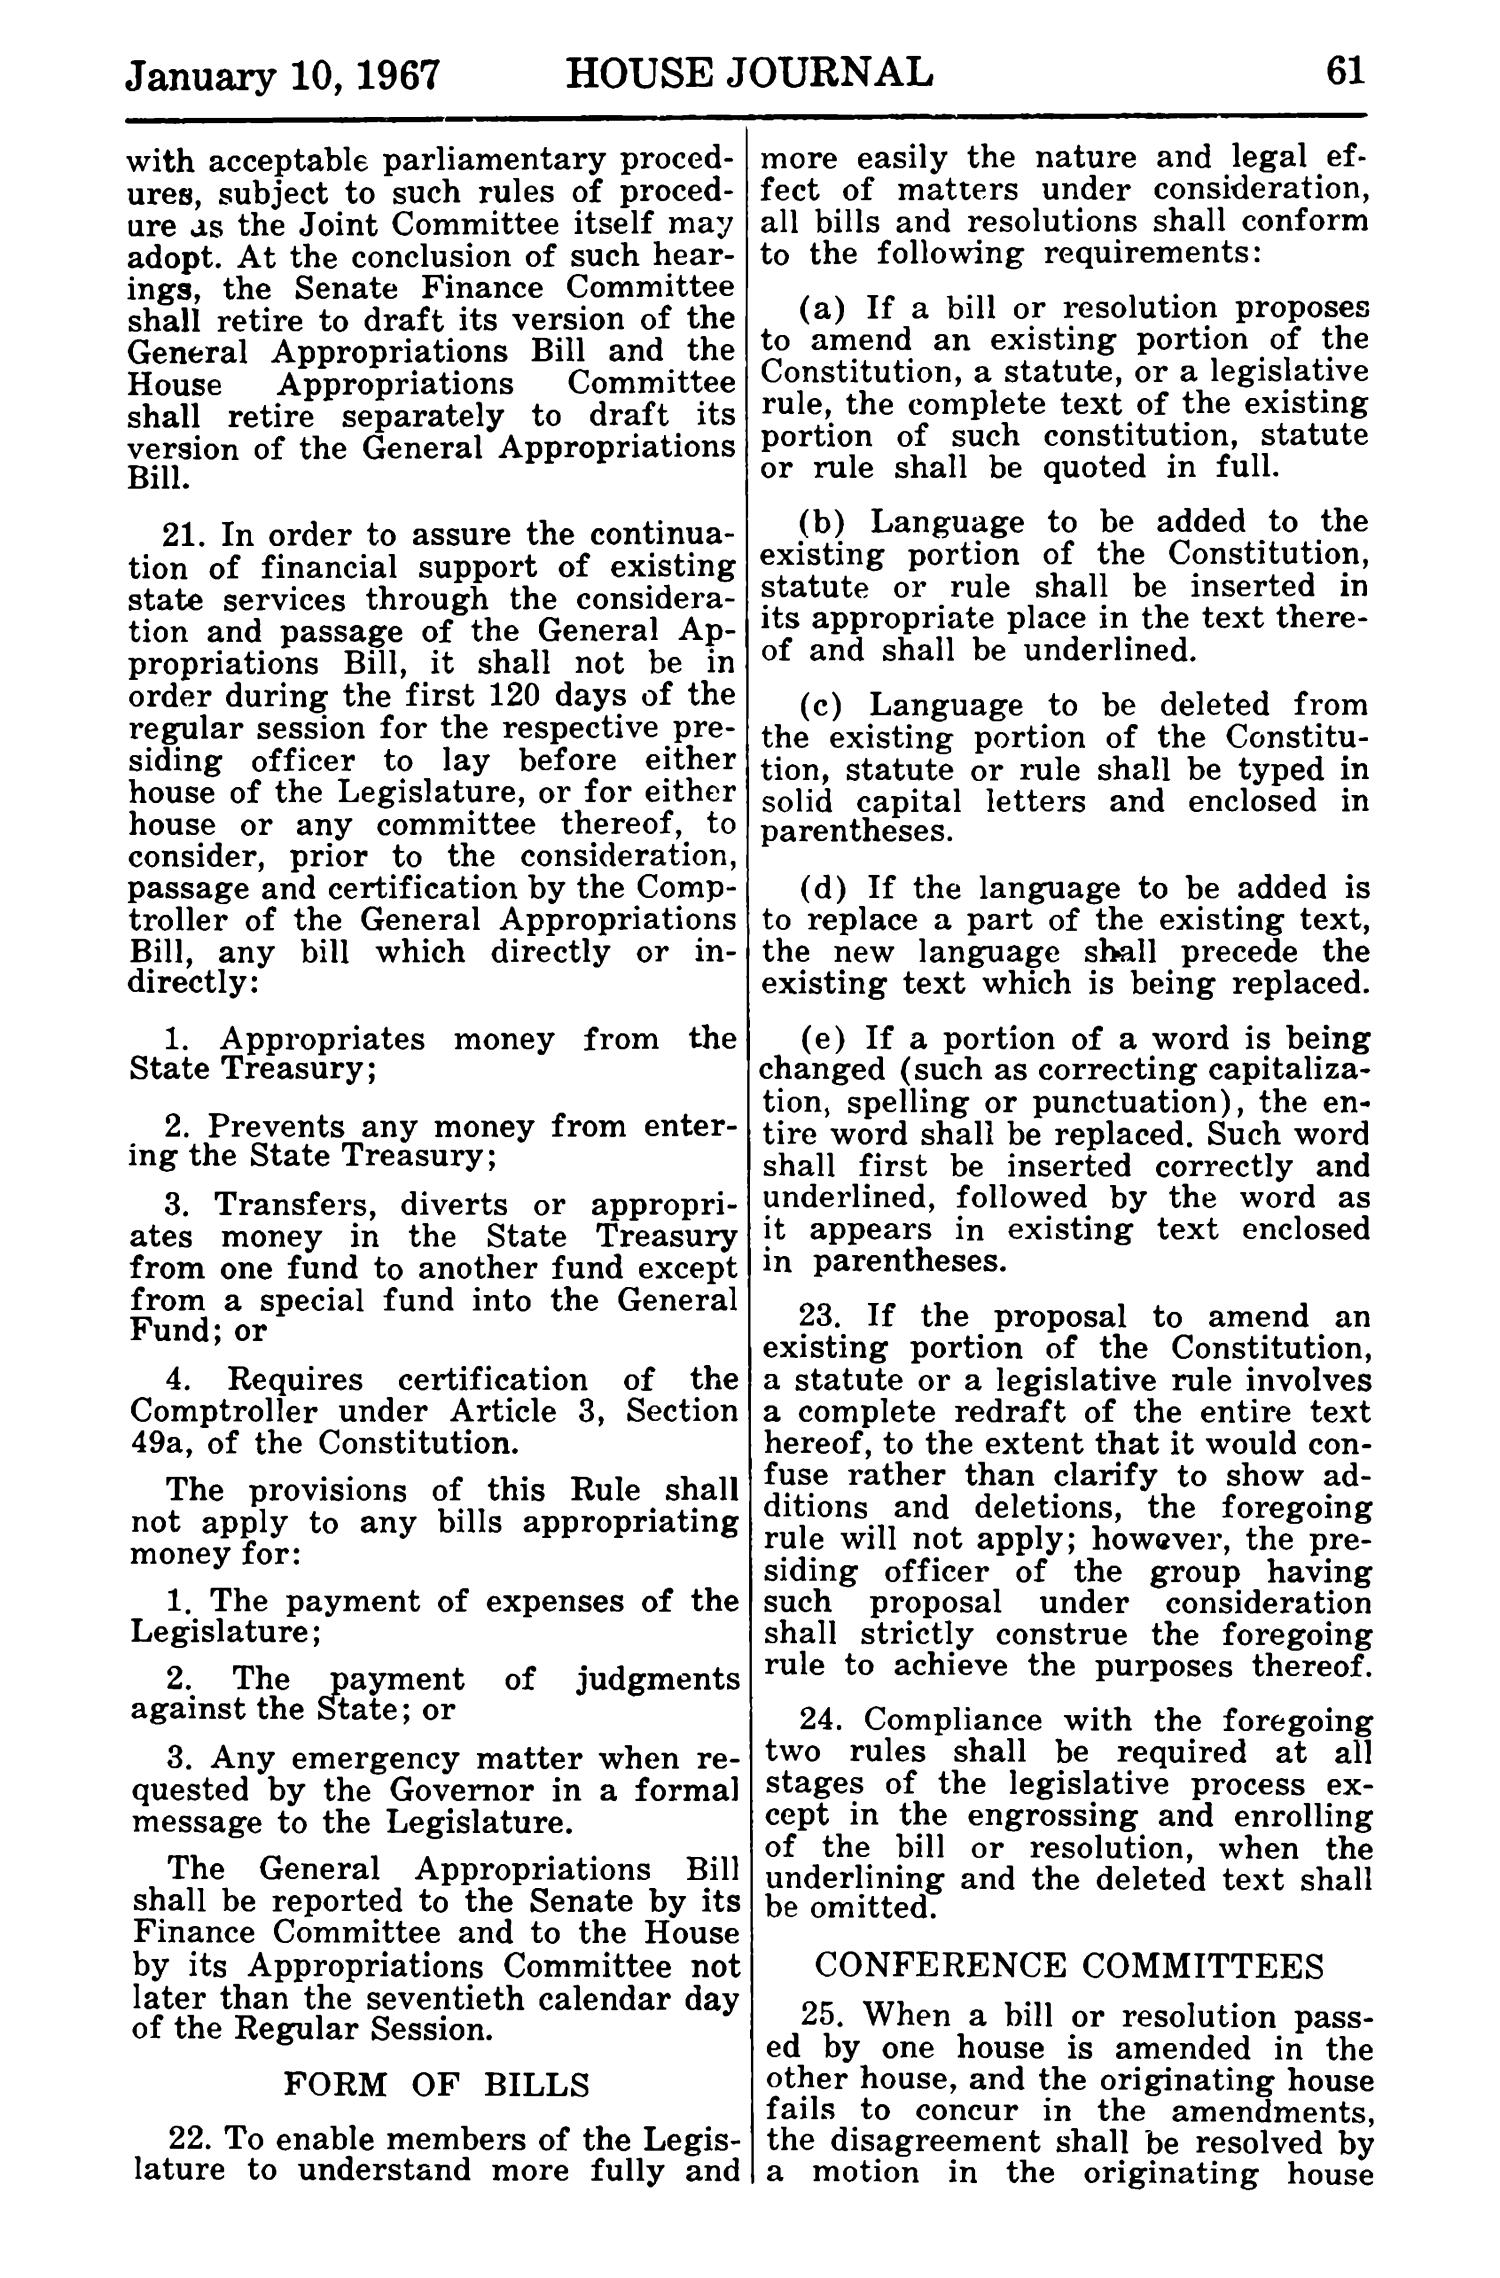 Journal of the House of Representatives of the Regular Session of the Sixtieth Legislature of the State of Texas, Volume 1
                                                
                                                    61
                                                